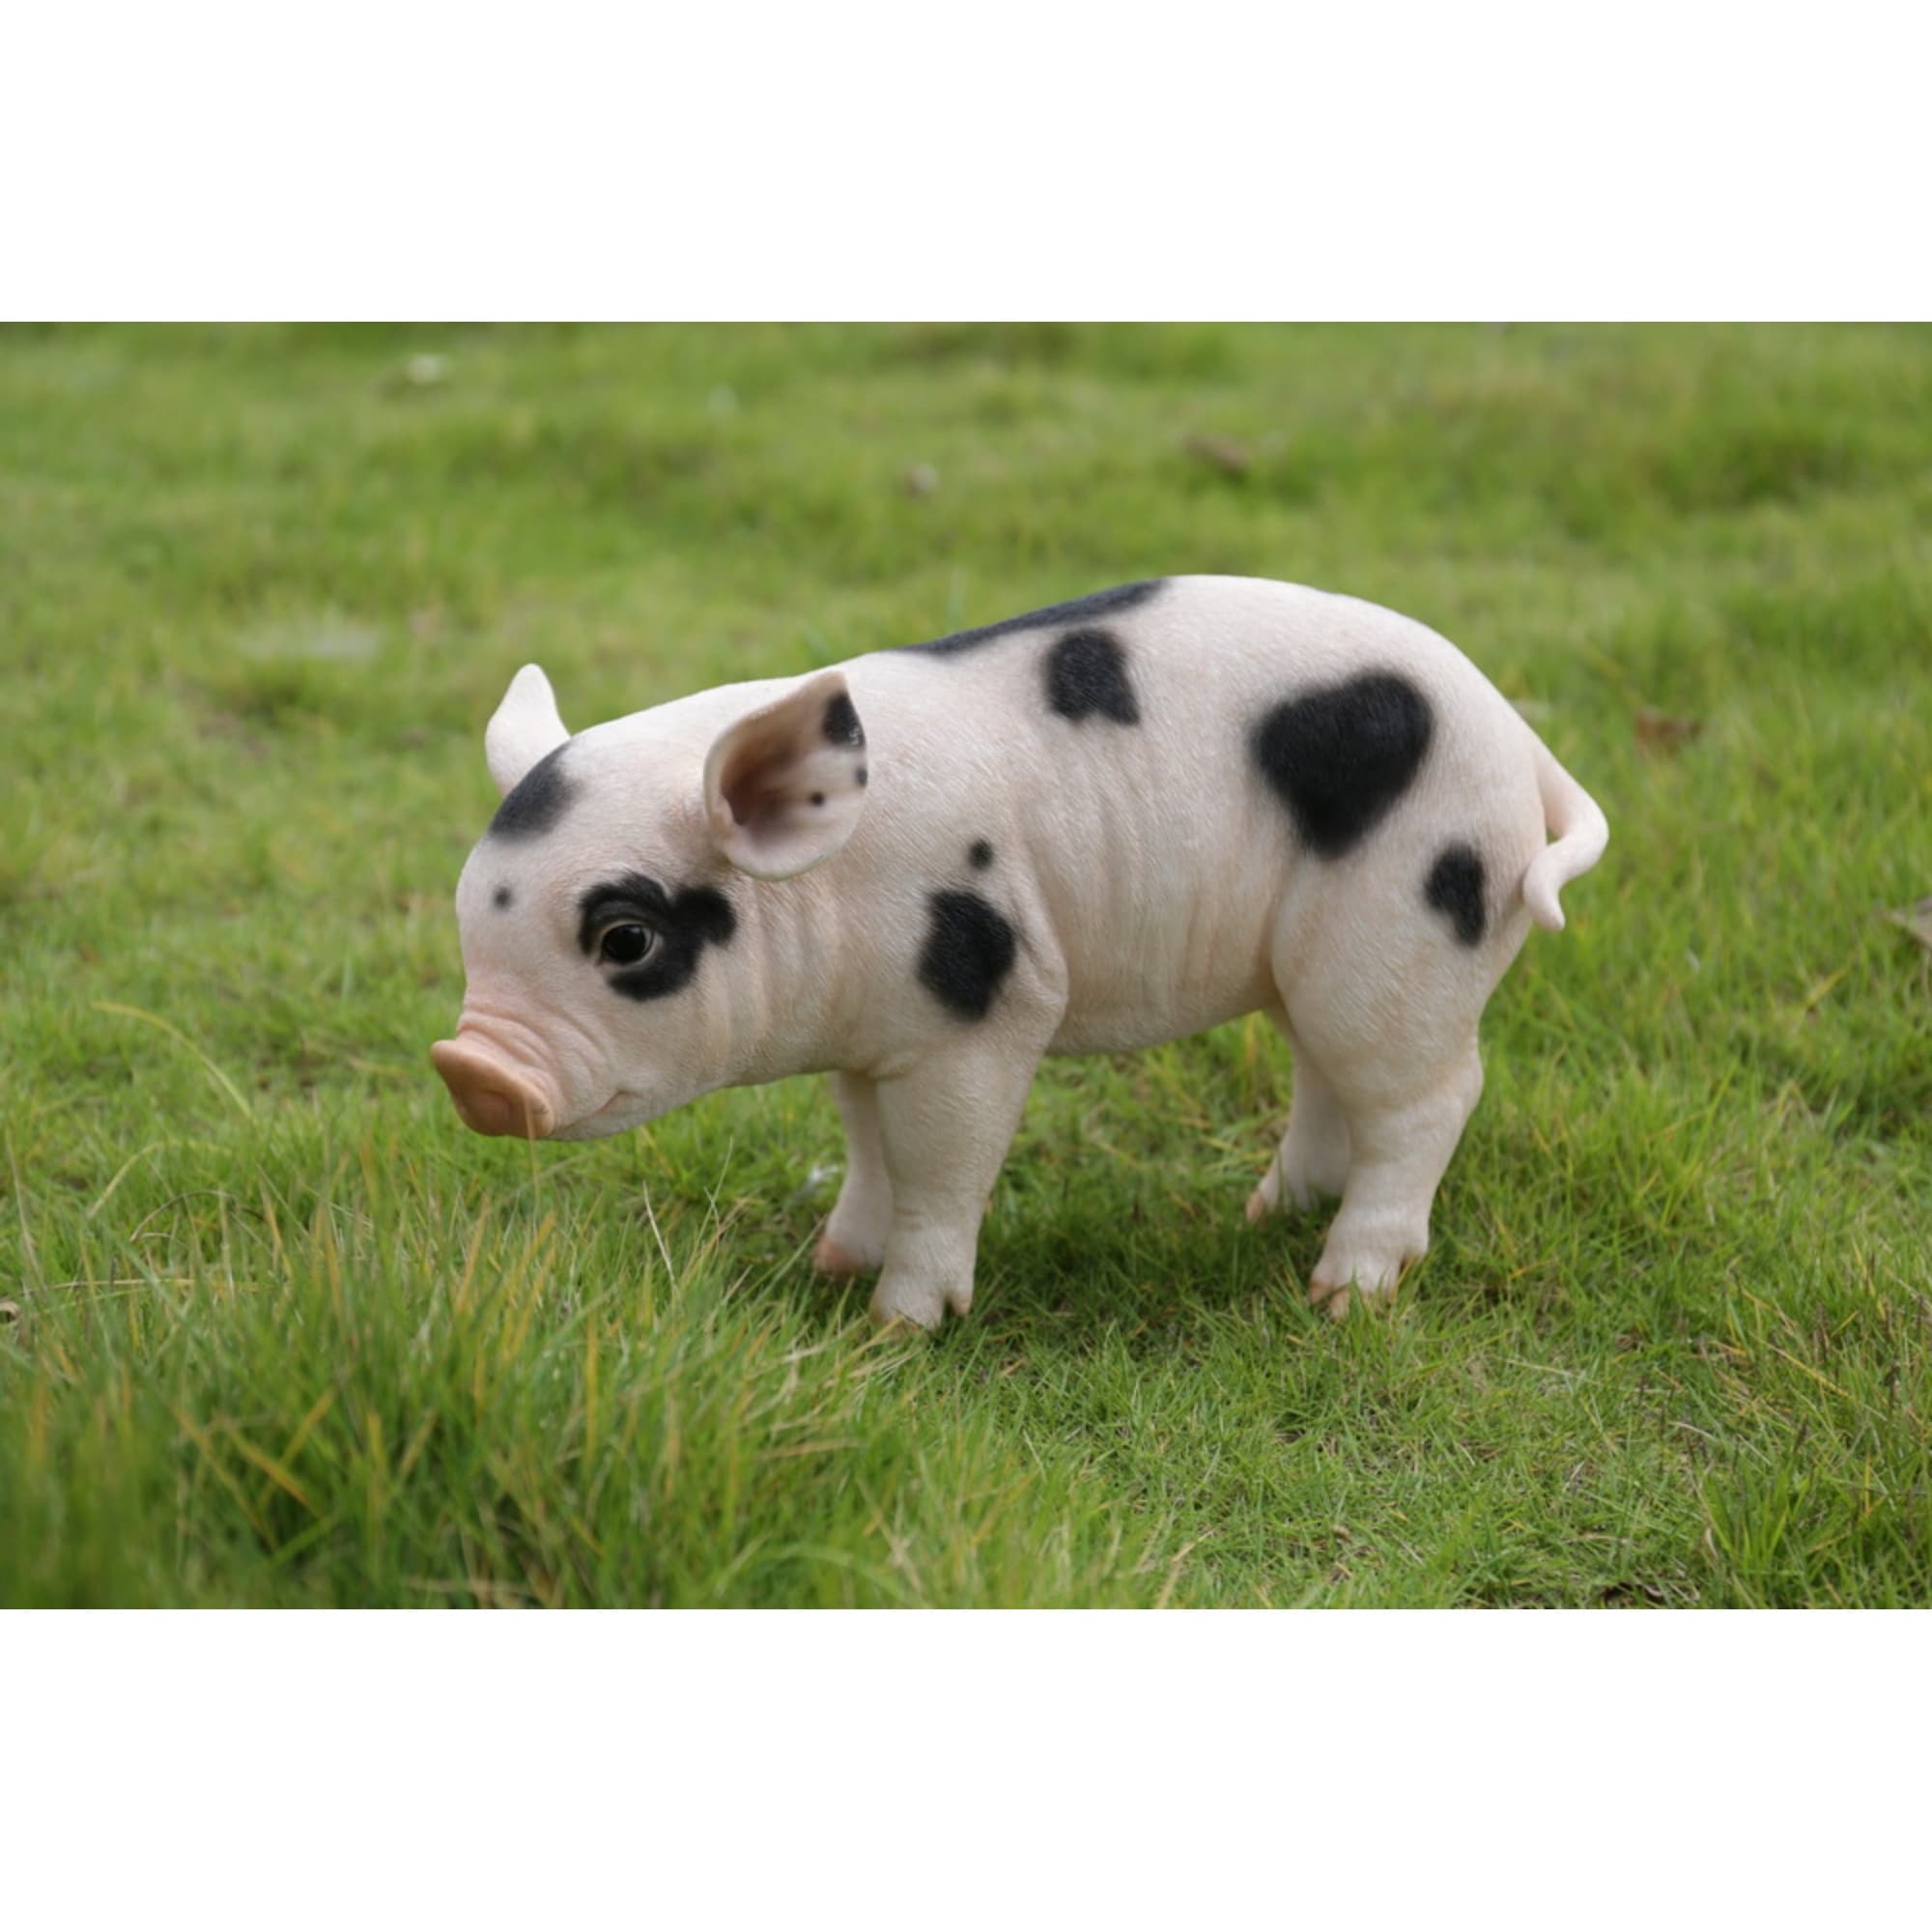 Standing Baby Pig With Black Spots - On Sale - Bed Bath & Beyond